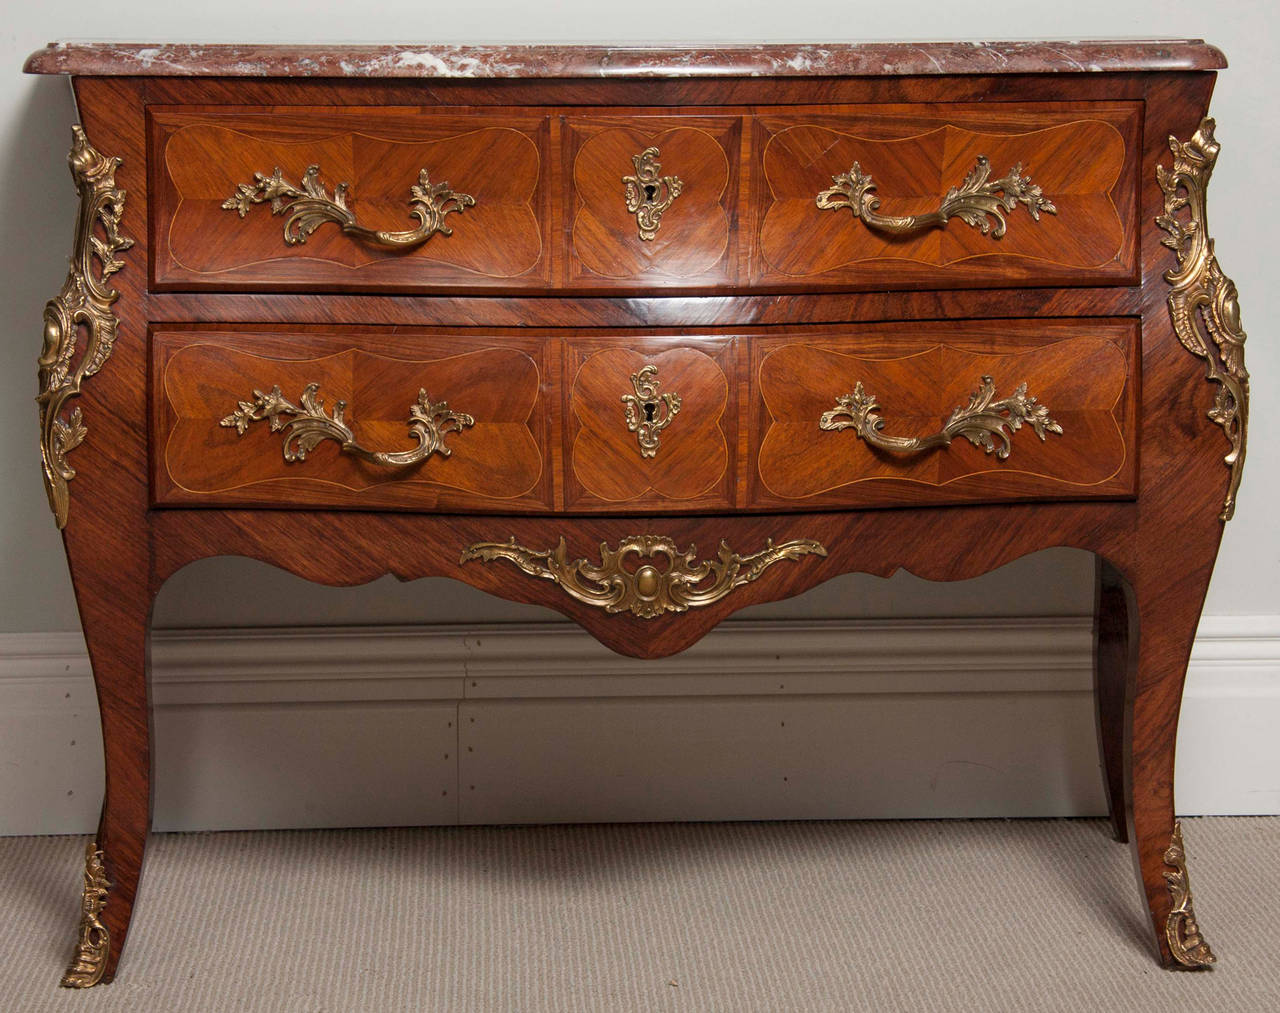 A French mid-19th century two-drawer tulipwood Serpentine commode with boxwood line inlay, rosewood crossbanding and ormolu mounts. Superb form and lighter and more elegant than the three-drawer model most commonly found in French furniture.